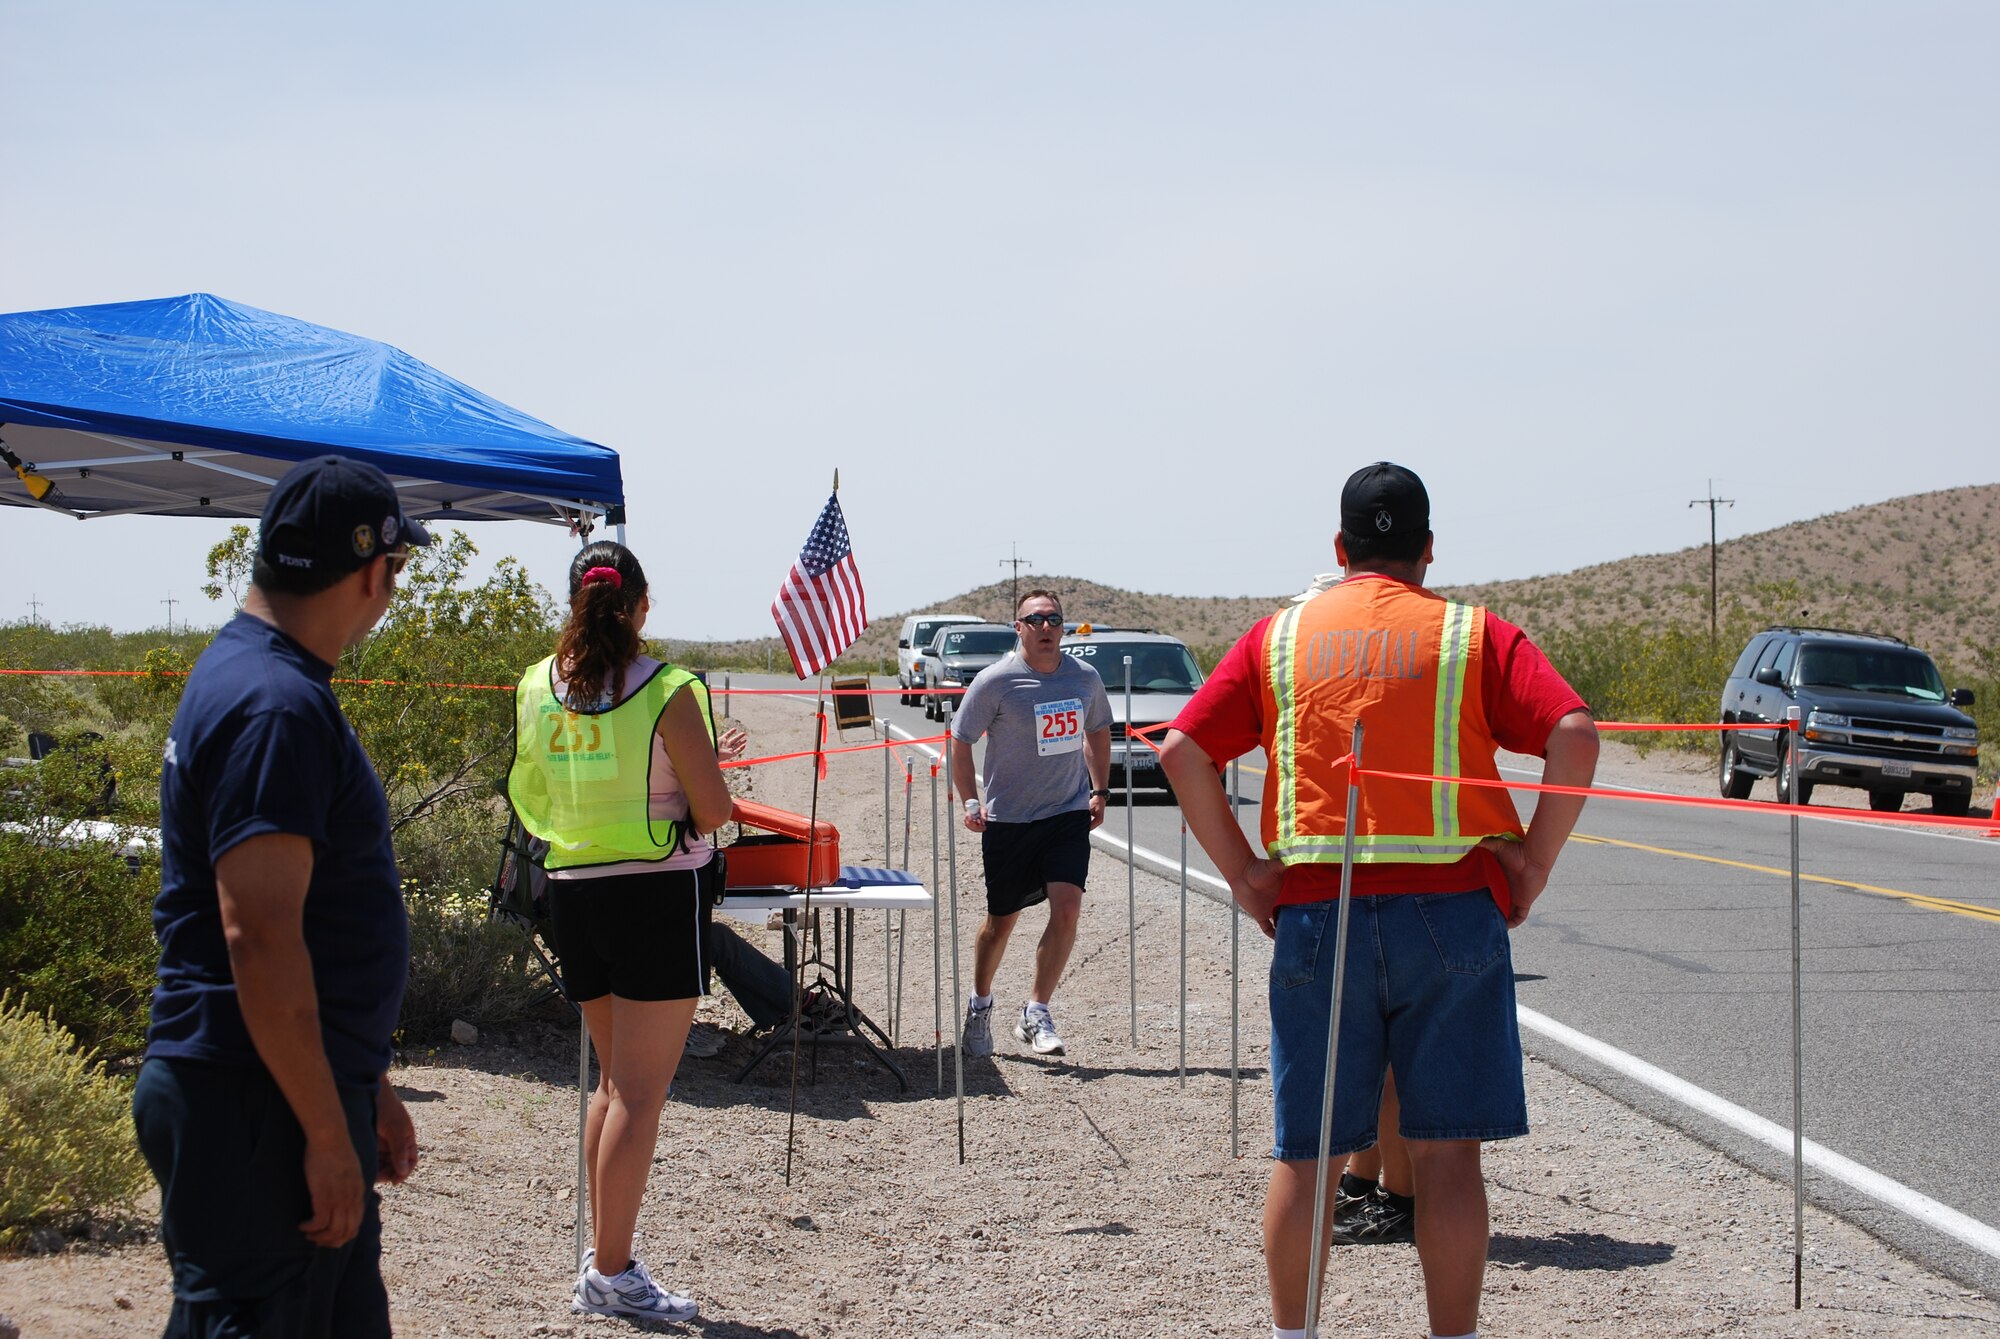 Justin Brodrick (third from left), member of team LAAFB, finishes his leg as Josie Fonseca (second from left) is ready to "catch" him while race officials look on during the 26th Annual "Baker to Vegas" Challenge Cup Relay Race April 17 and 18, 2010. (Courtesy photo)